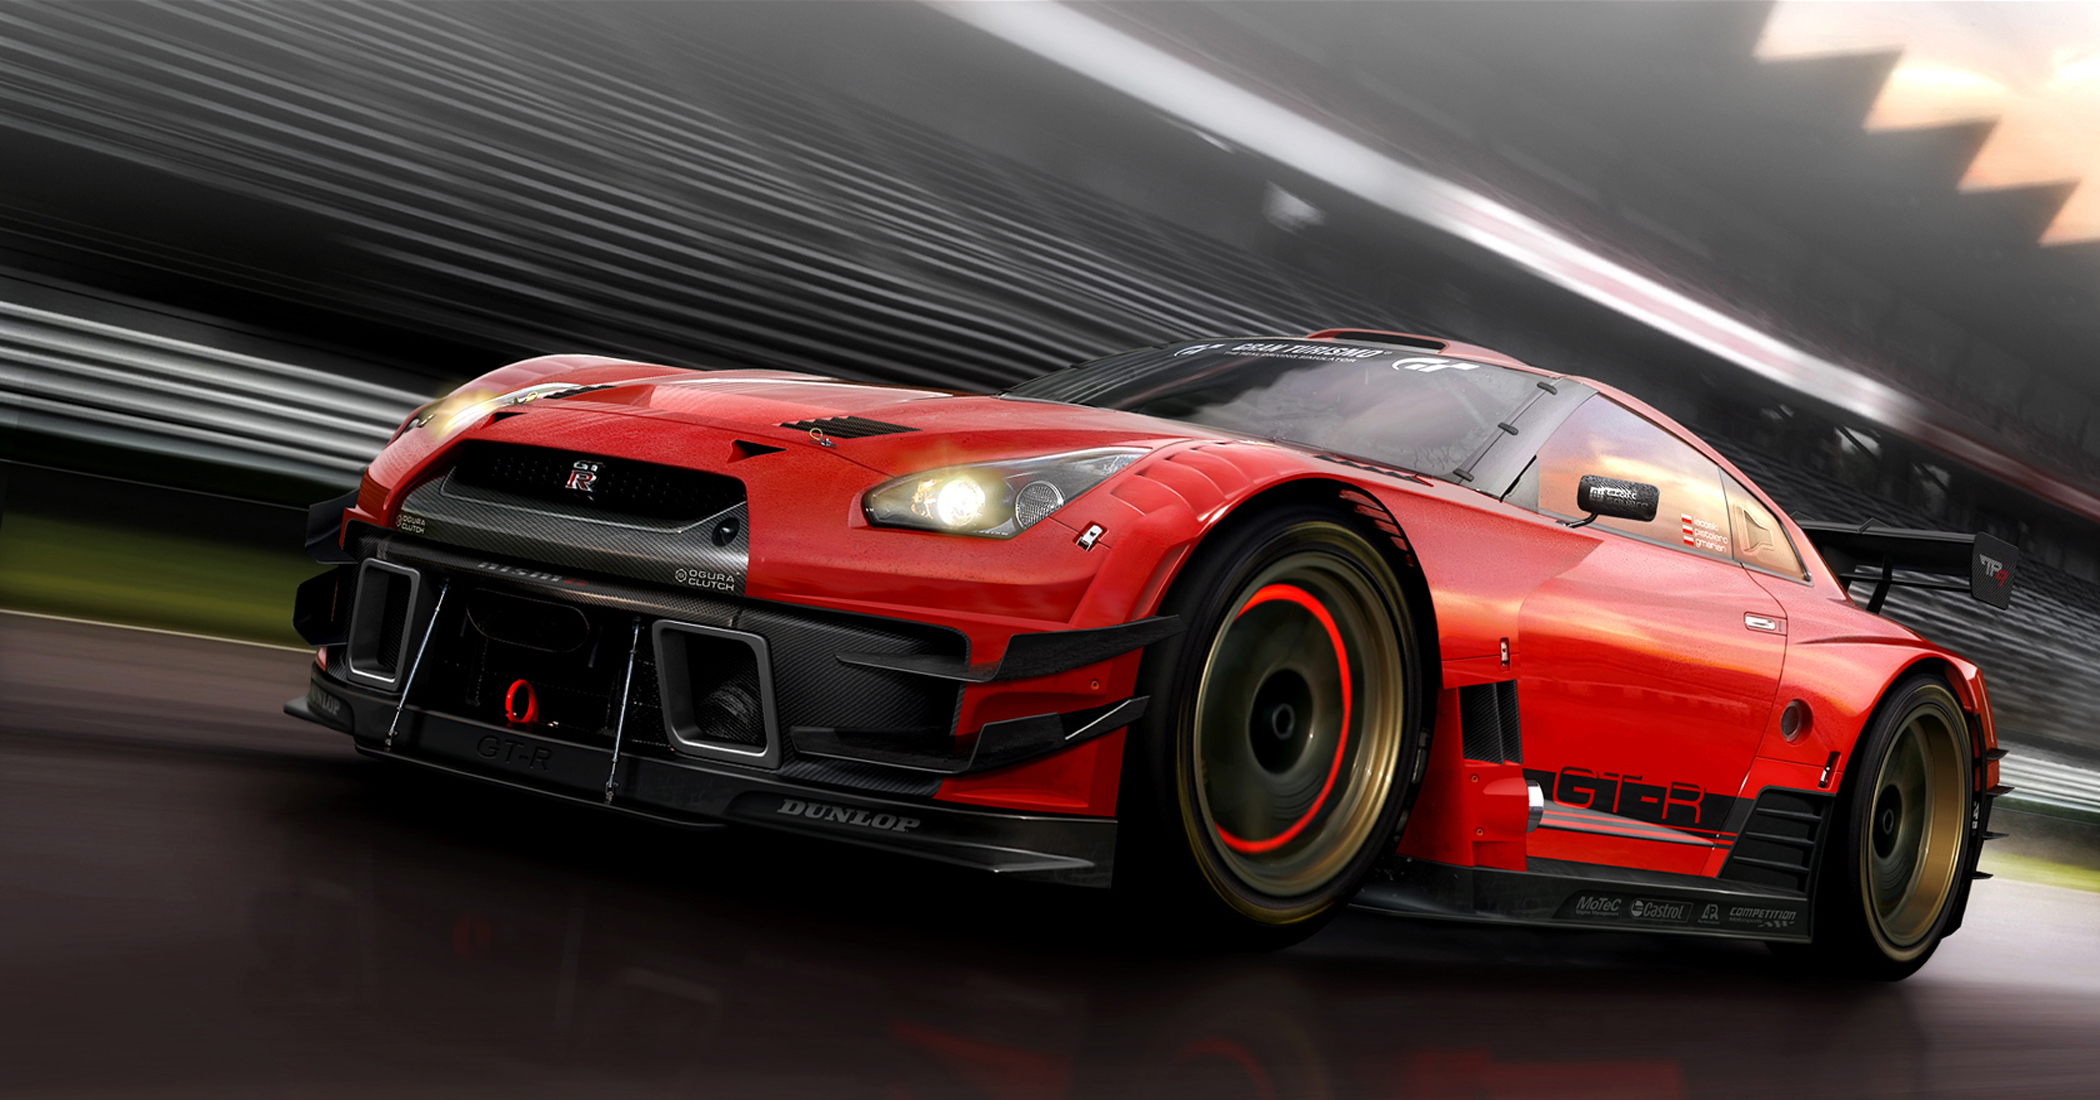 General 2100x1100 Nissan car red cars vehicle Nissan GT-R race cars Japanese cars frontal view headlights reflection motion blur